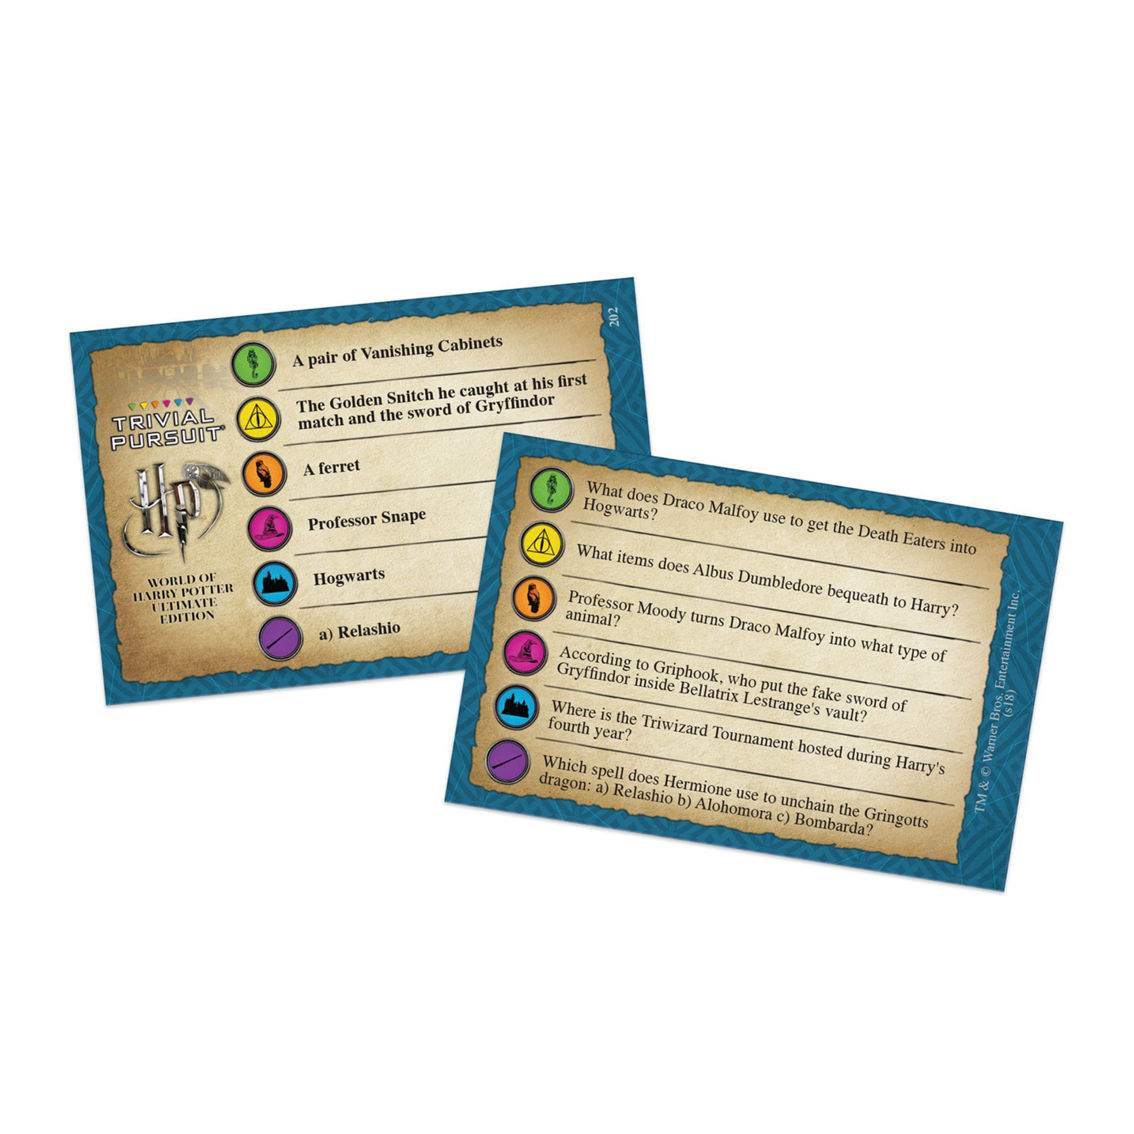 TRIVIAL PURSUIT®: World of Harry Potter Ultimate Edition - Image 4 of 5